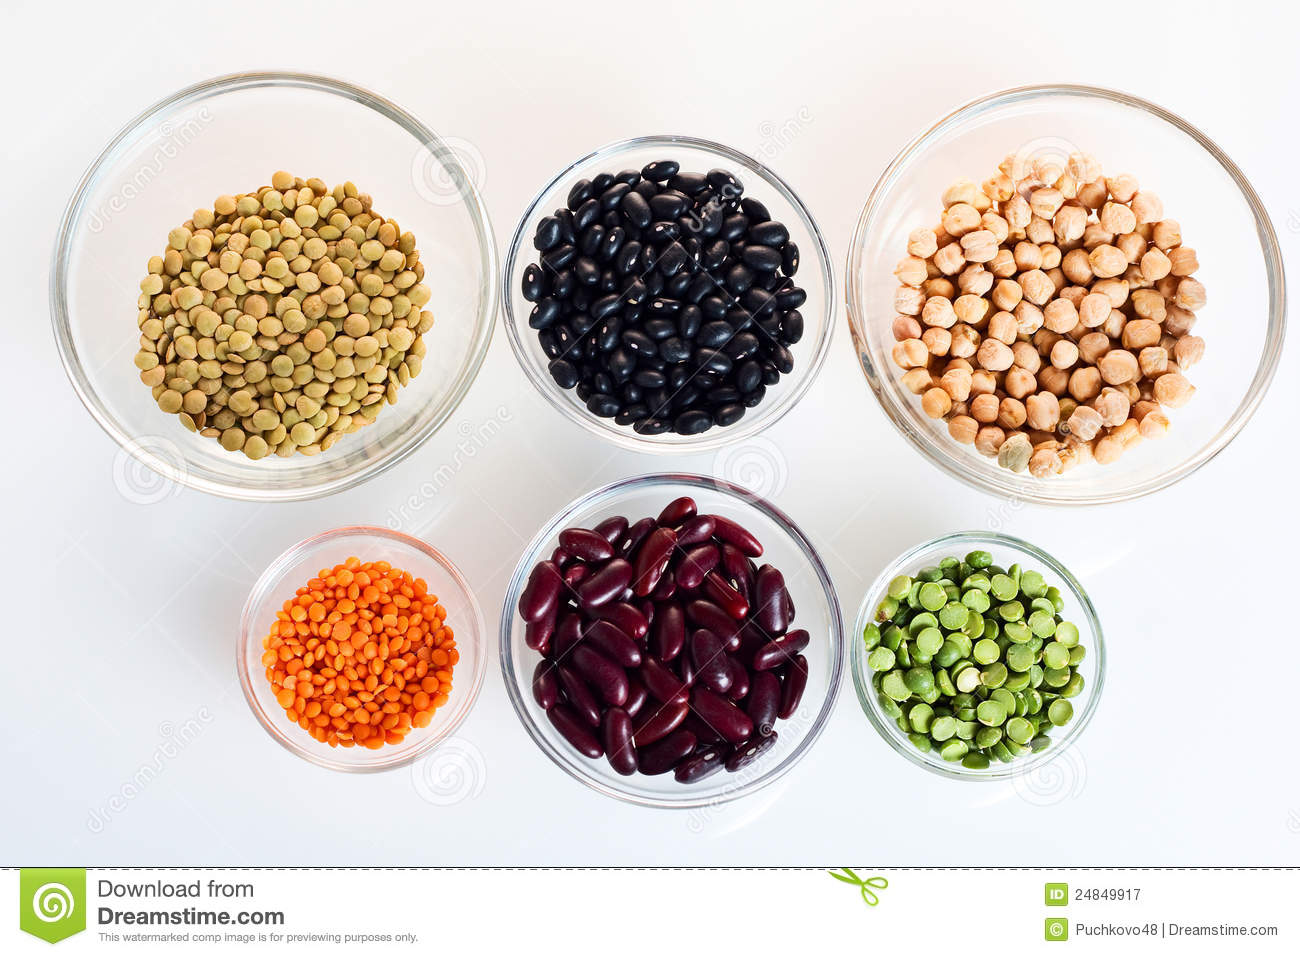 Assorted Beans And Legumes Royalty Free Stock Photography   Image